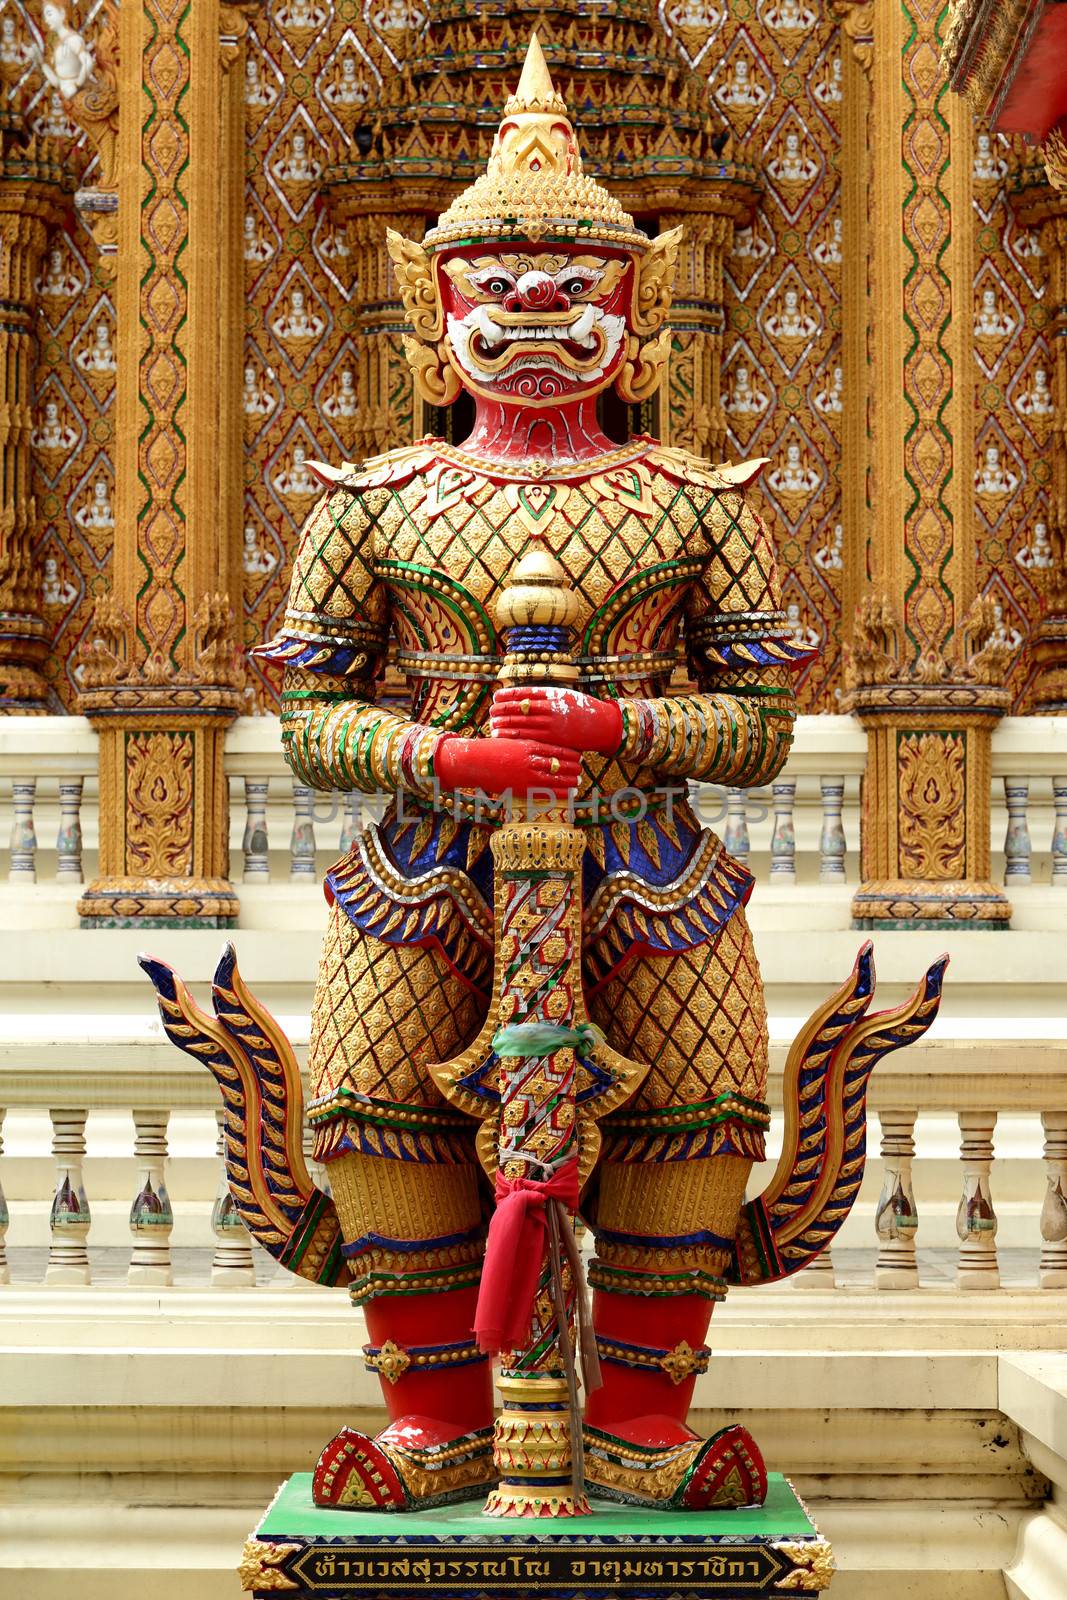 Thai giant guardian always stand left and right hand side of temple entrance